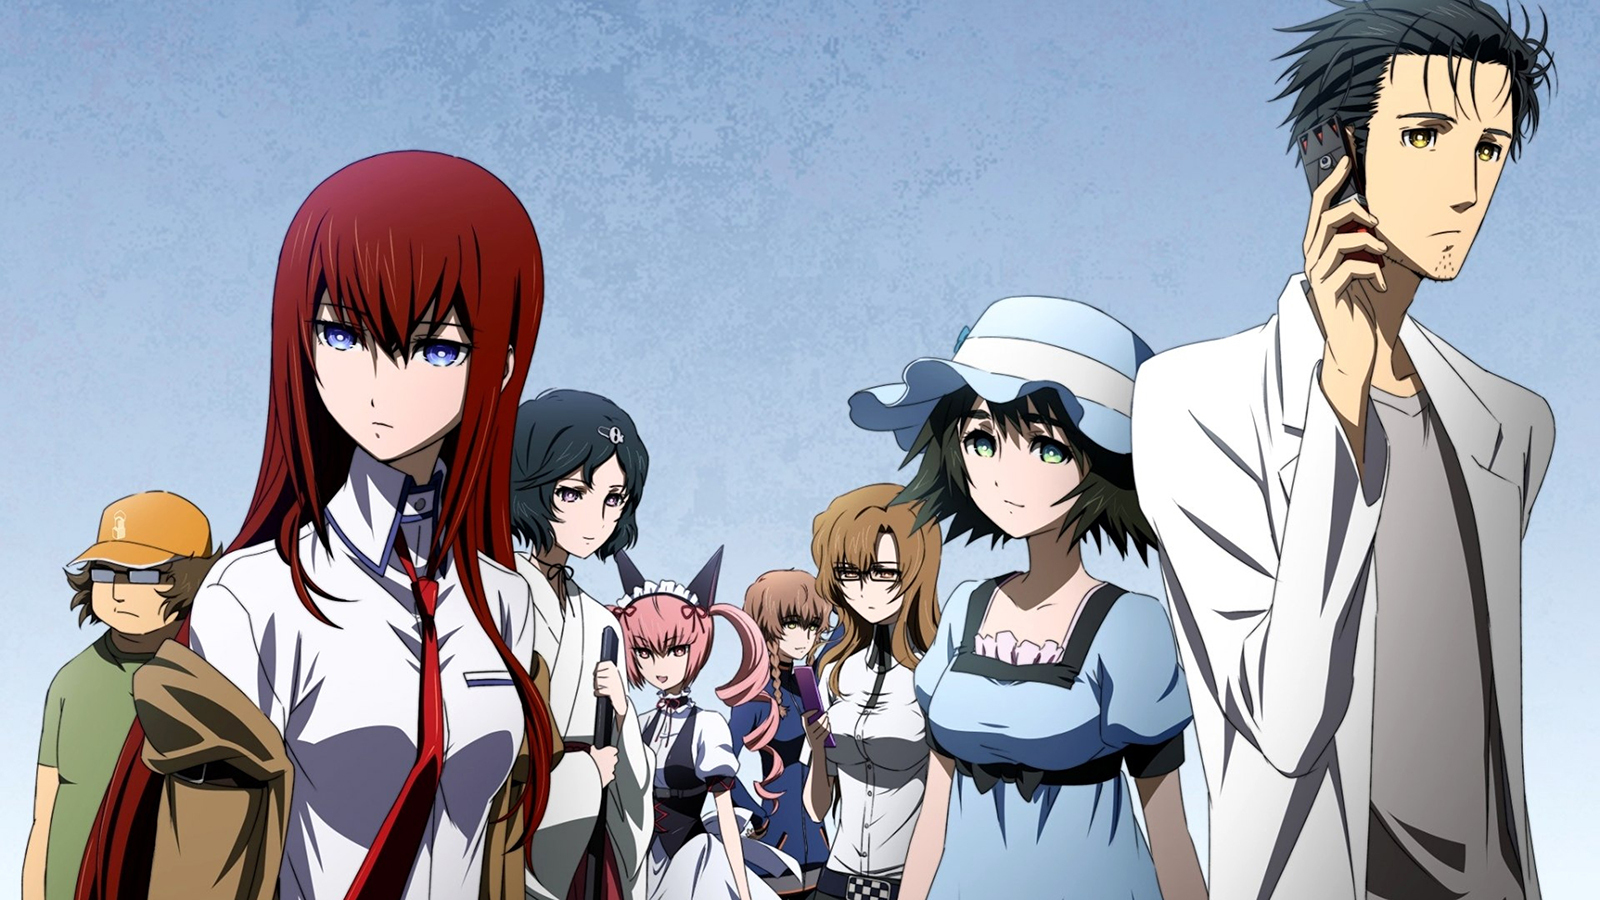 25 Most Popular Anime Series for Beginners to Watch - GeeksforGeeks